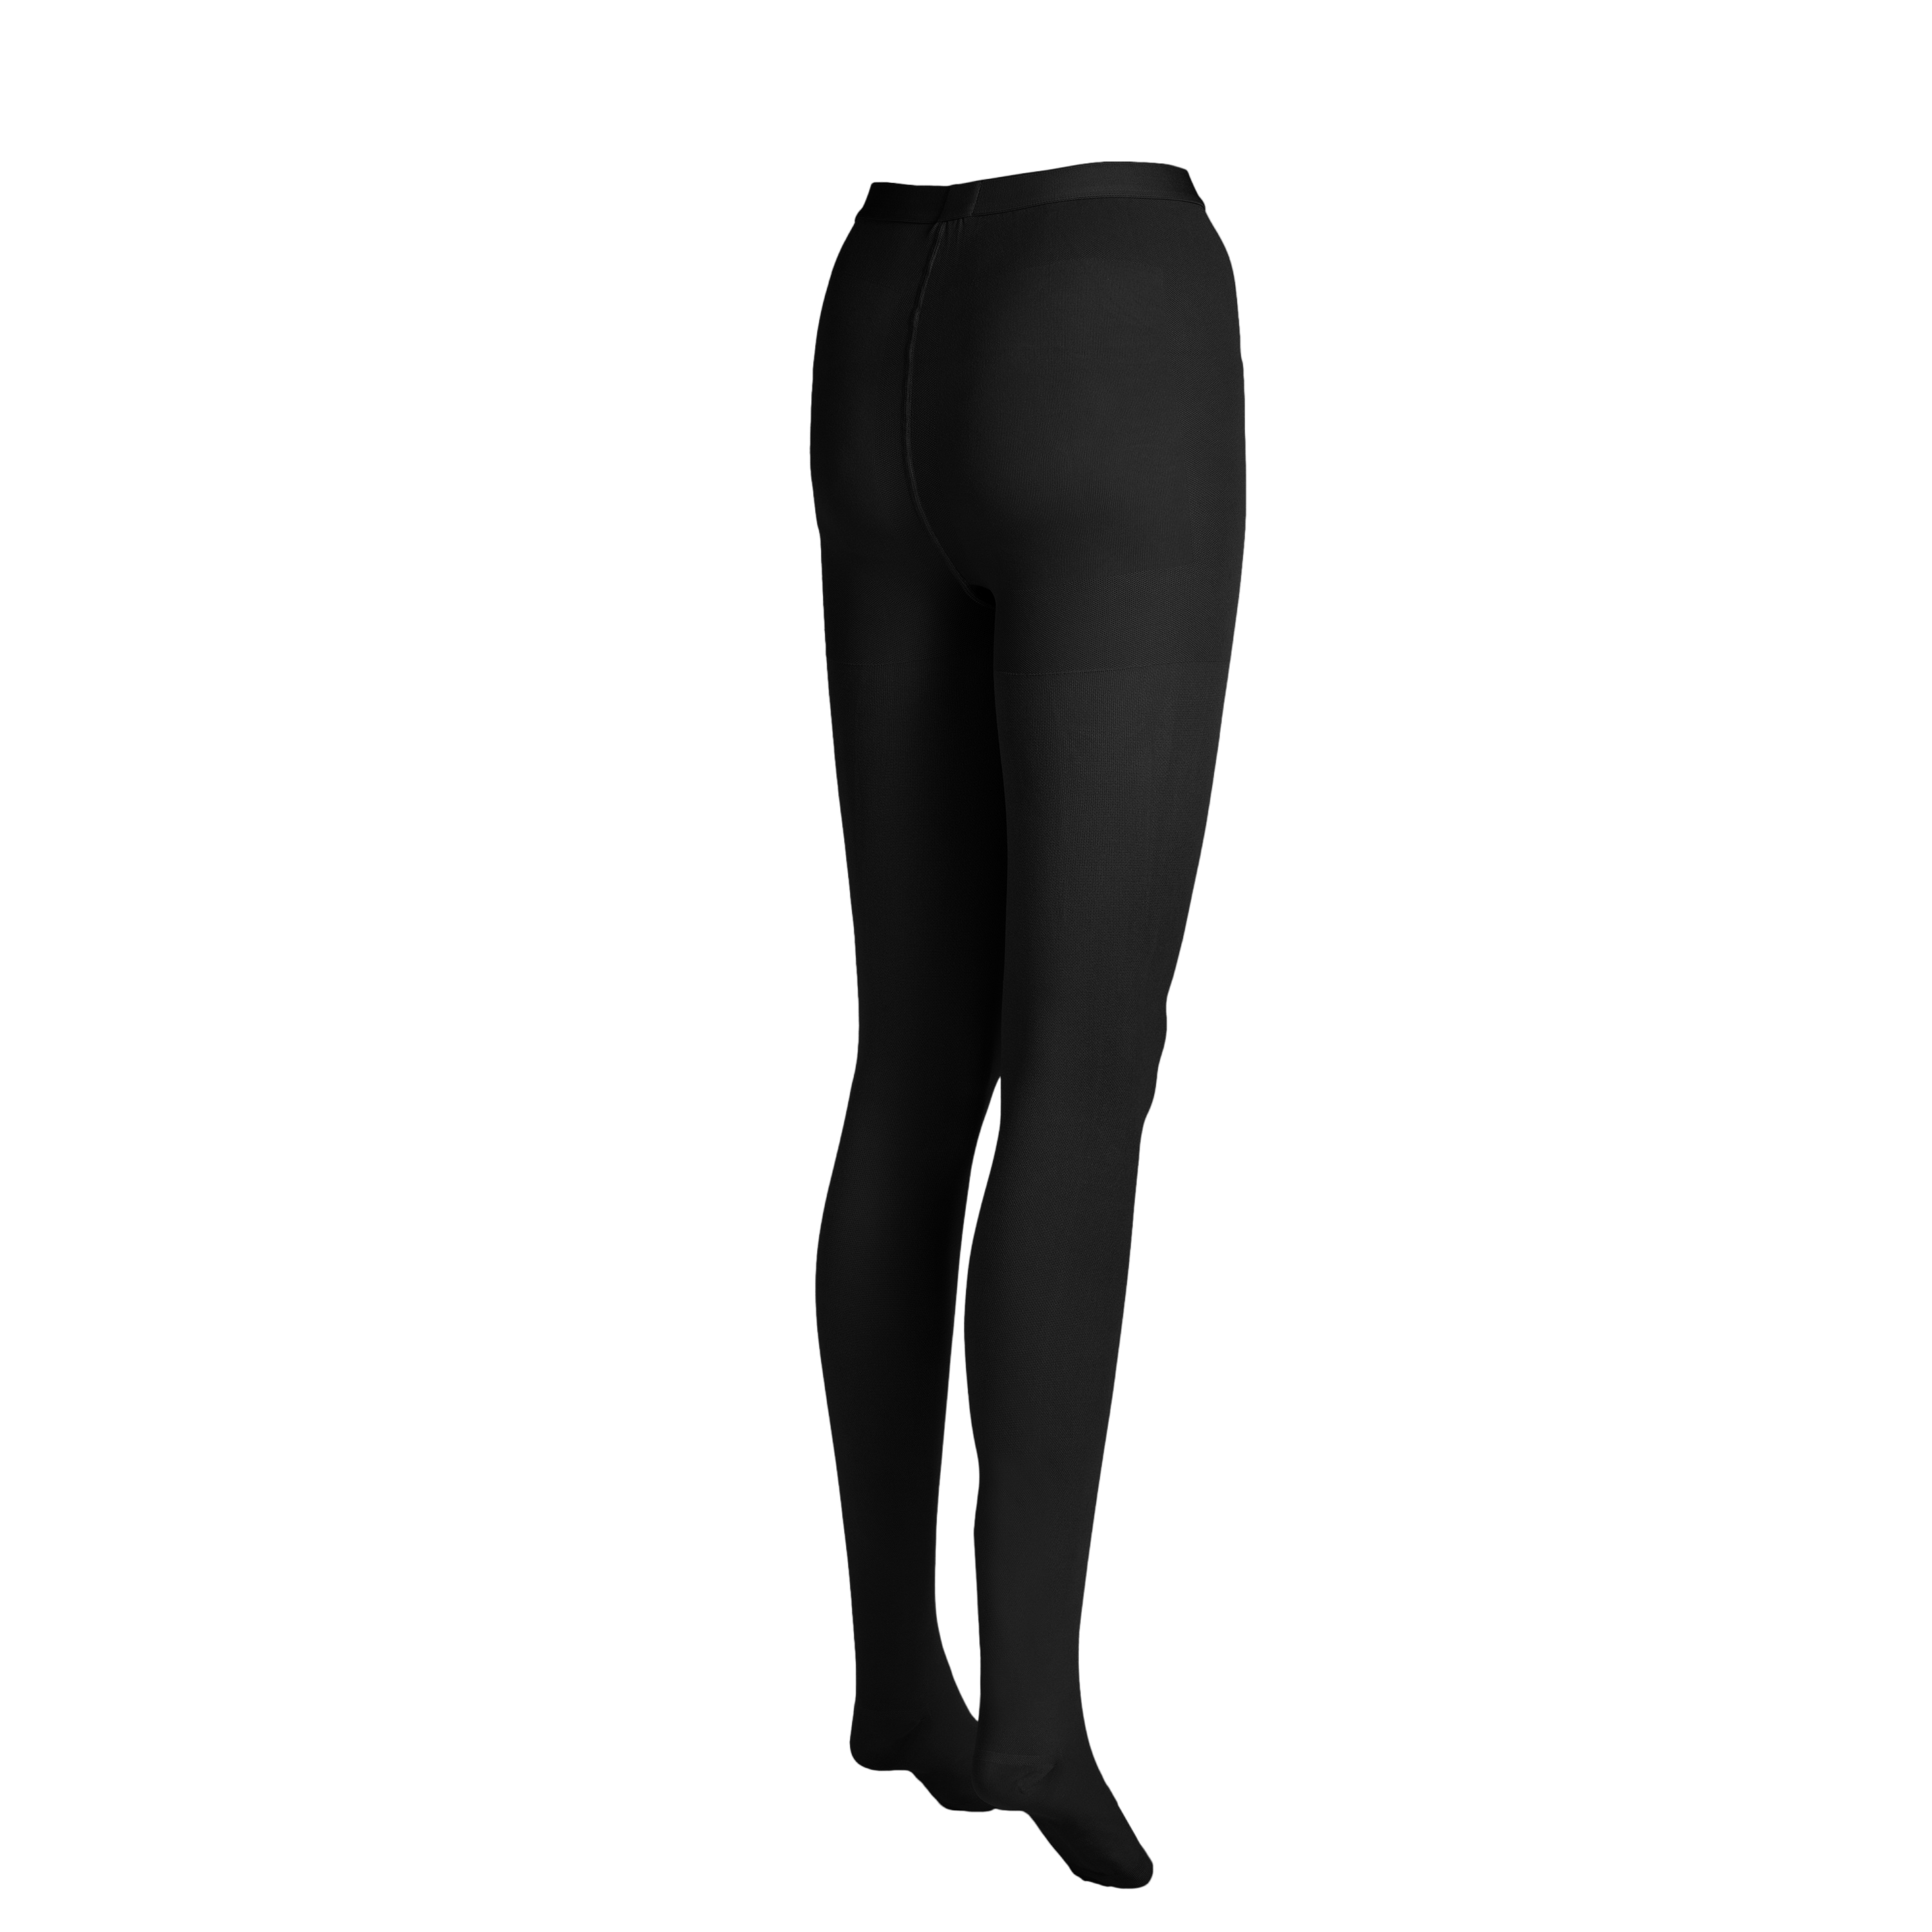  SZKANI Medical Compression Leggings for Women 20-30 mmhg Compression  Pantyhose, Medical Compression Tights for Varicose Veins, Swelling,  Lymphedema(Black(Footless)_L) : Health & Household